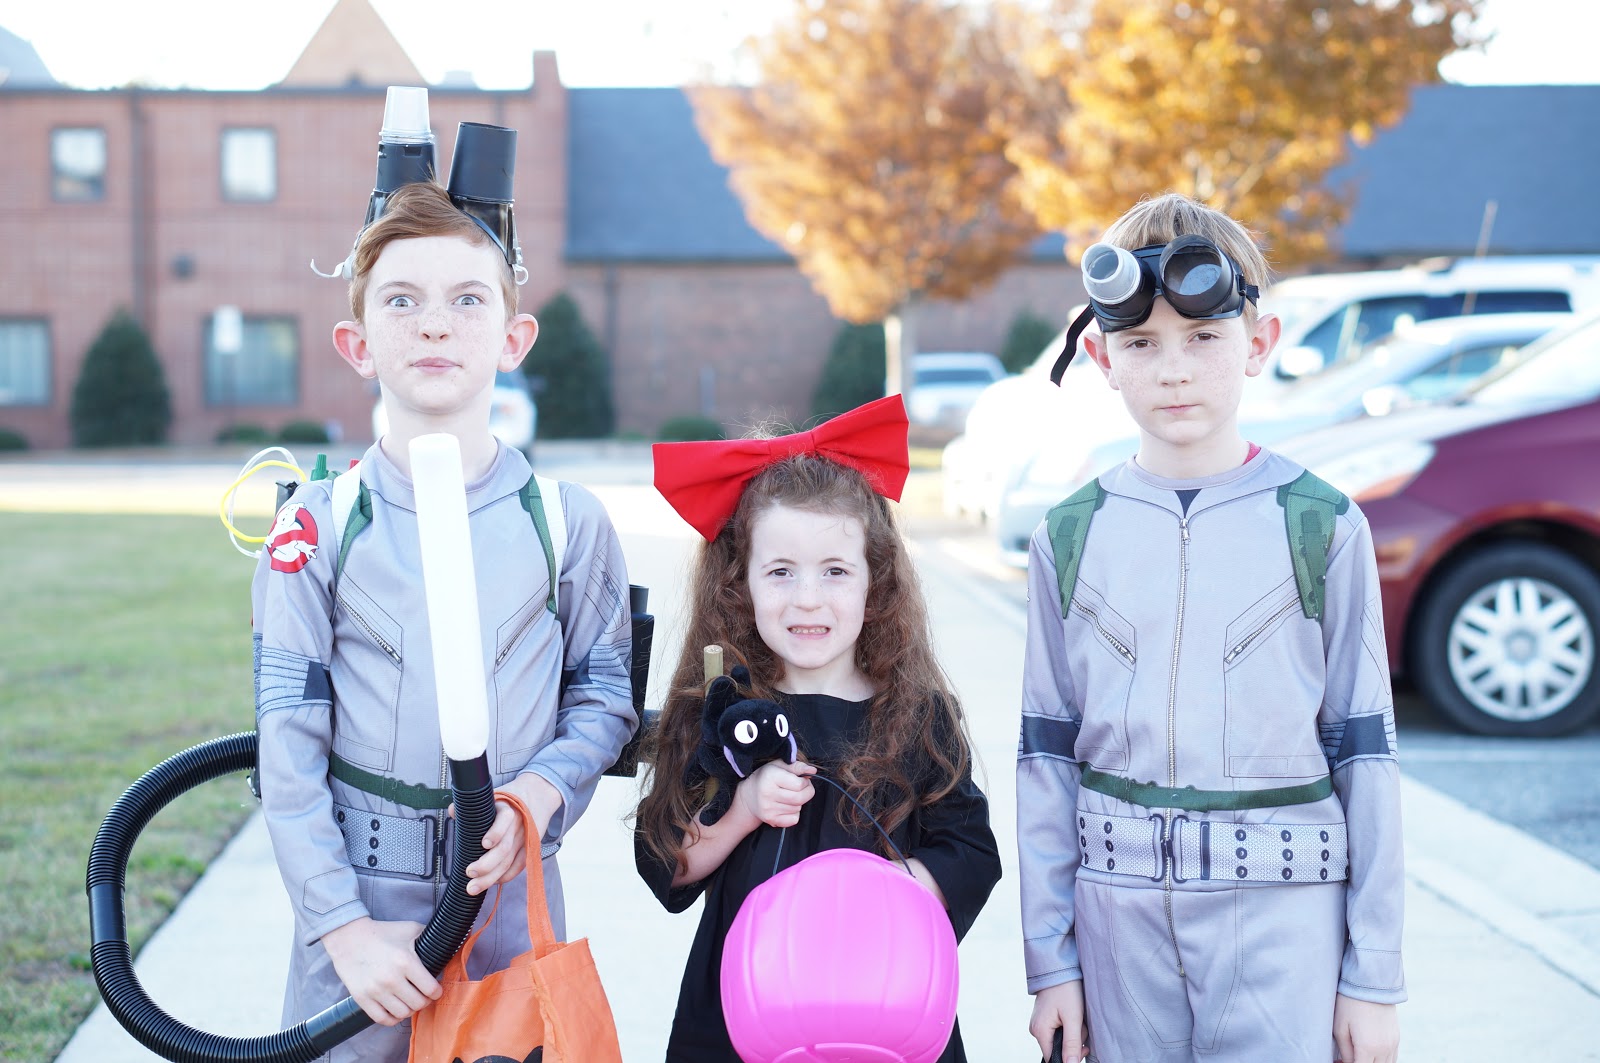 Rebecca Lately Halloween Costumes Homemade Ghostbusters Proton Pack Homemade Kiki's Delivery Service